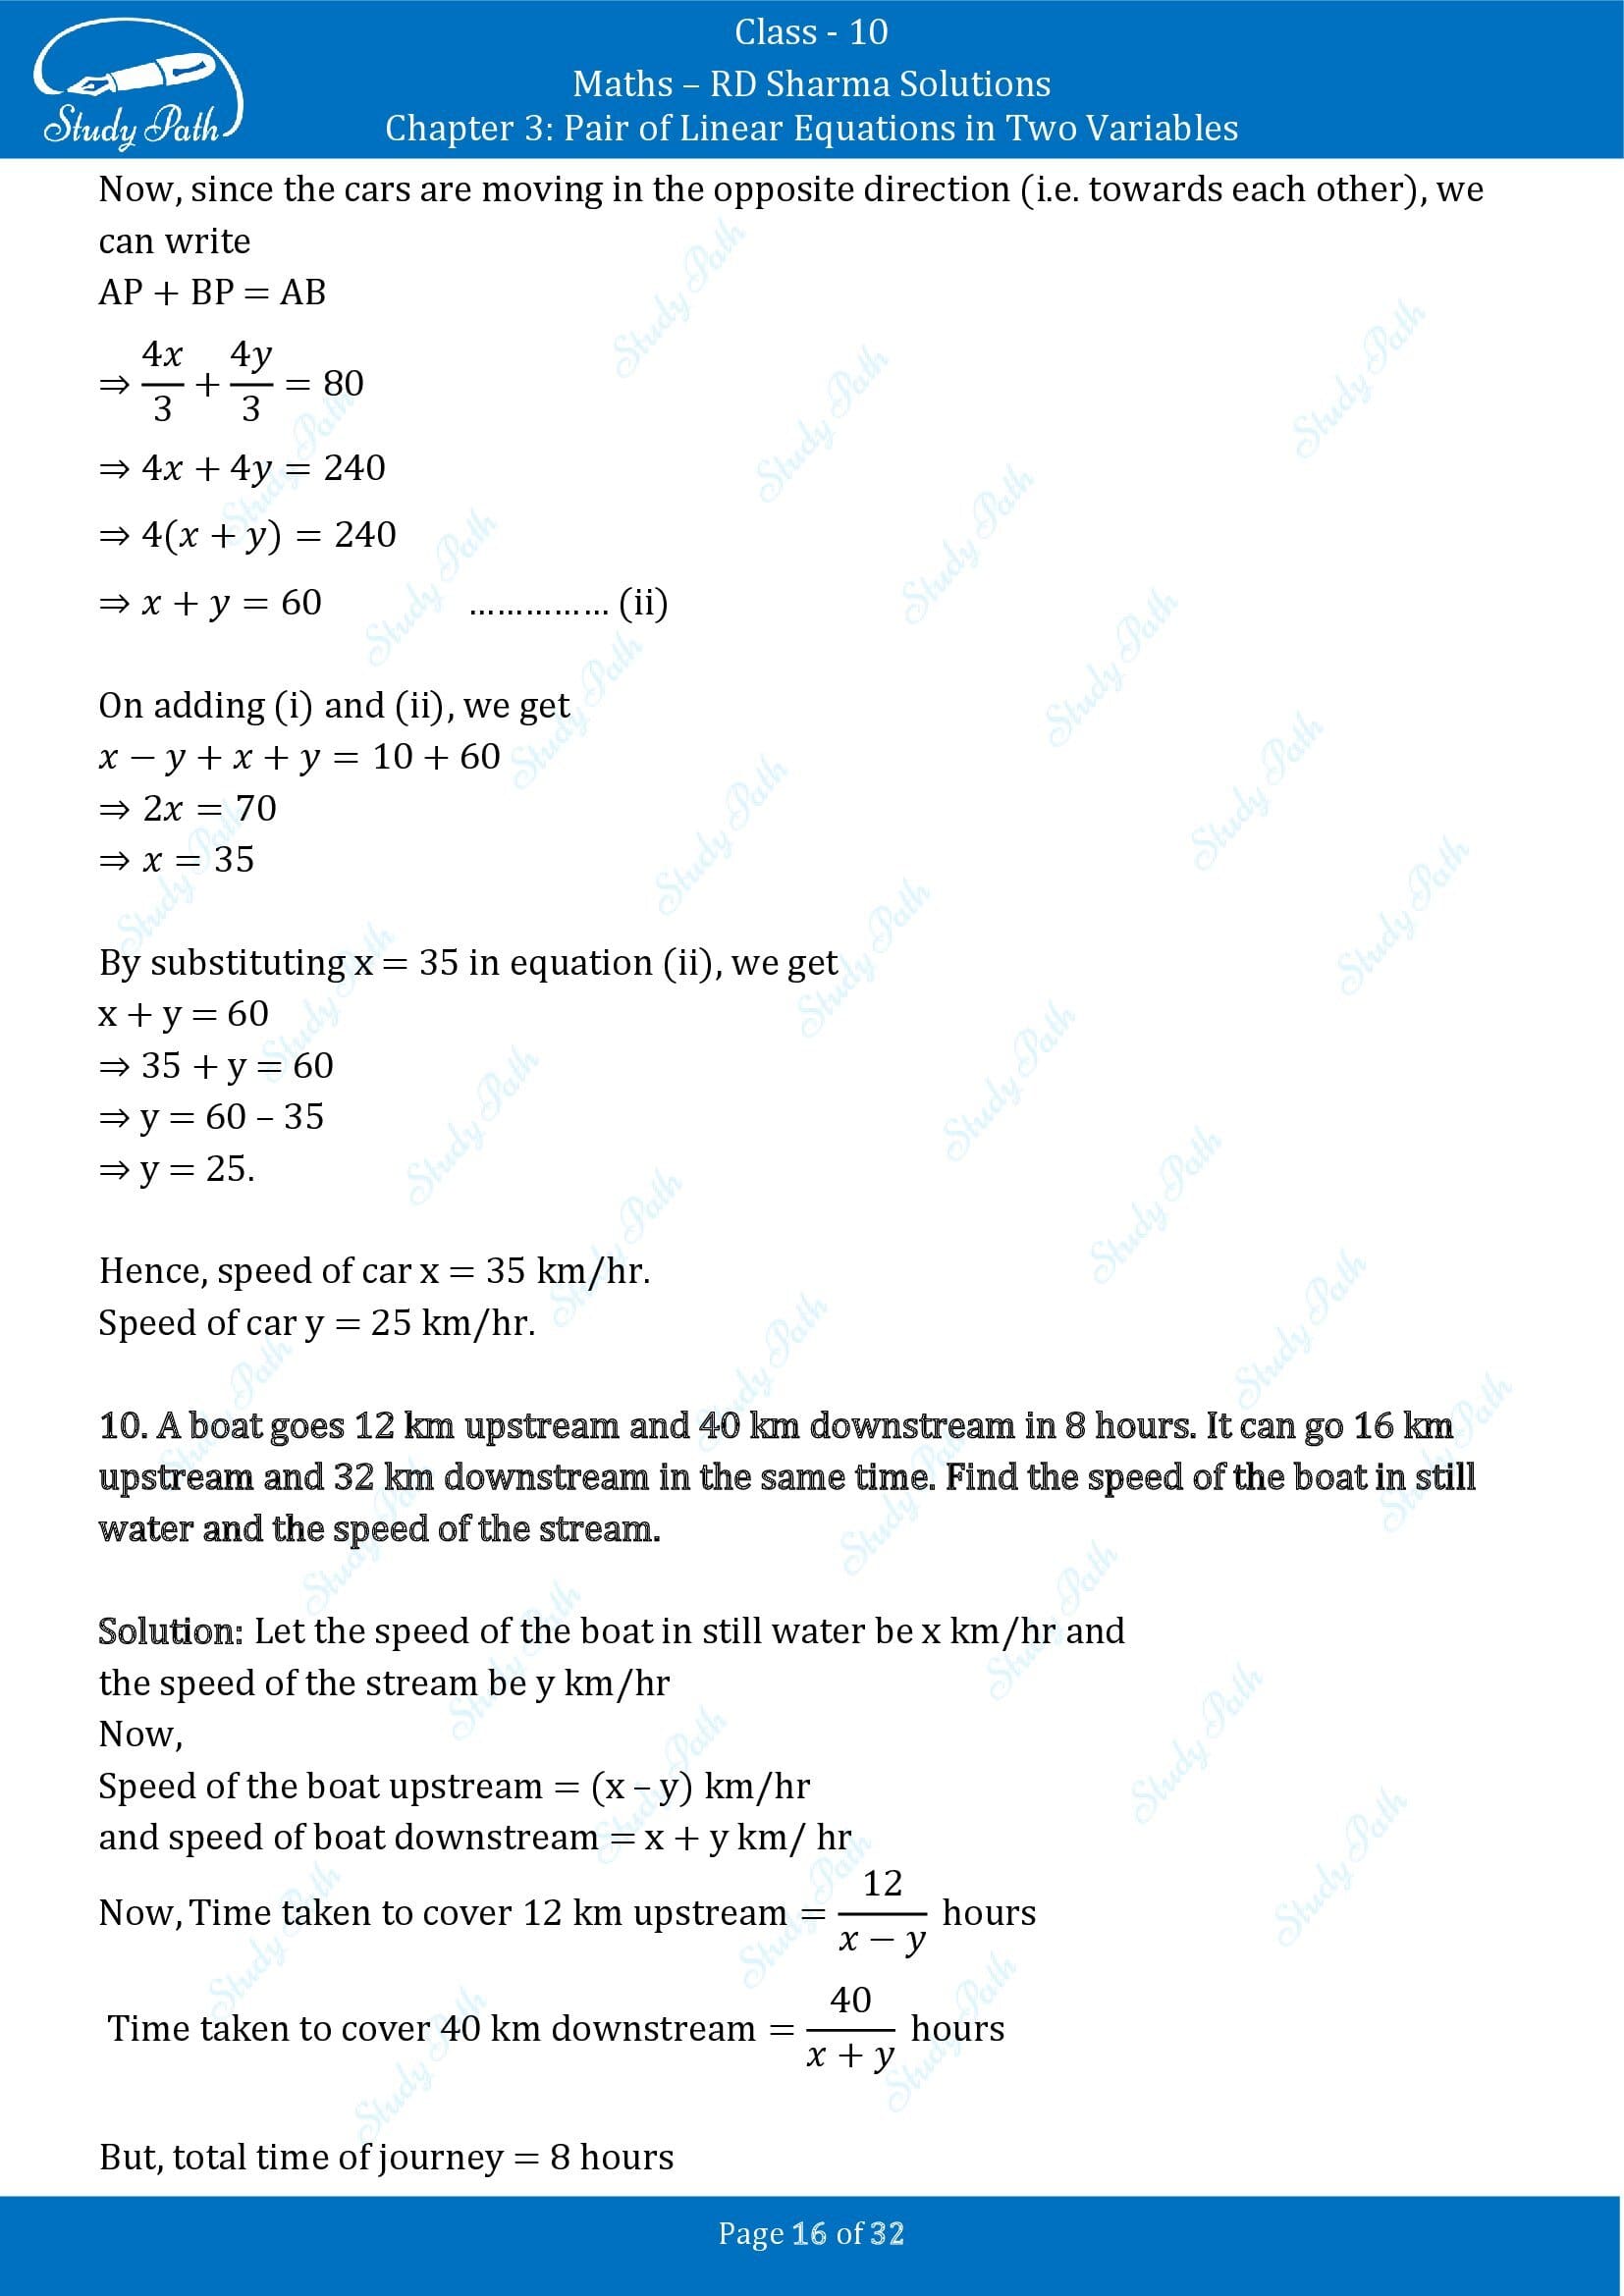 RD Sharma Solutions Class 10 Chapter 3 Pair of Linear Equations in Two Variables Exercise 3.10 00016